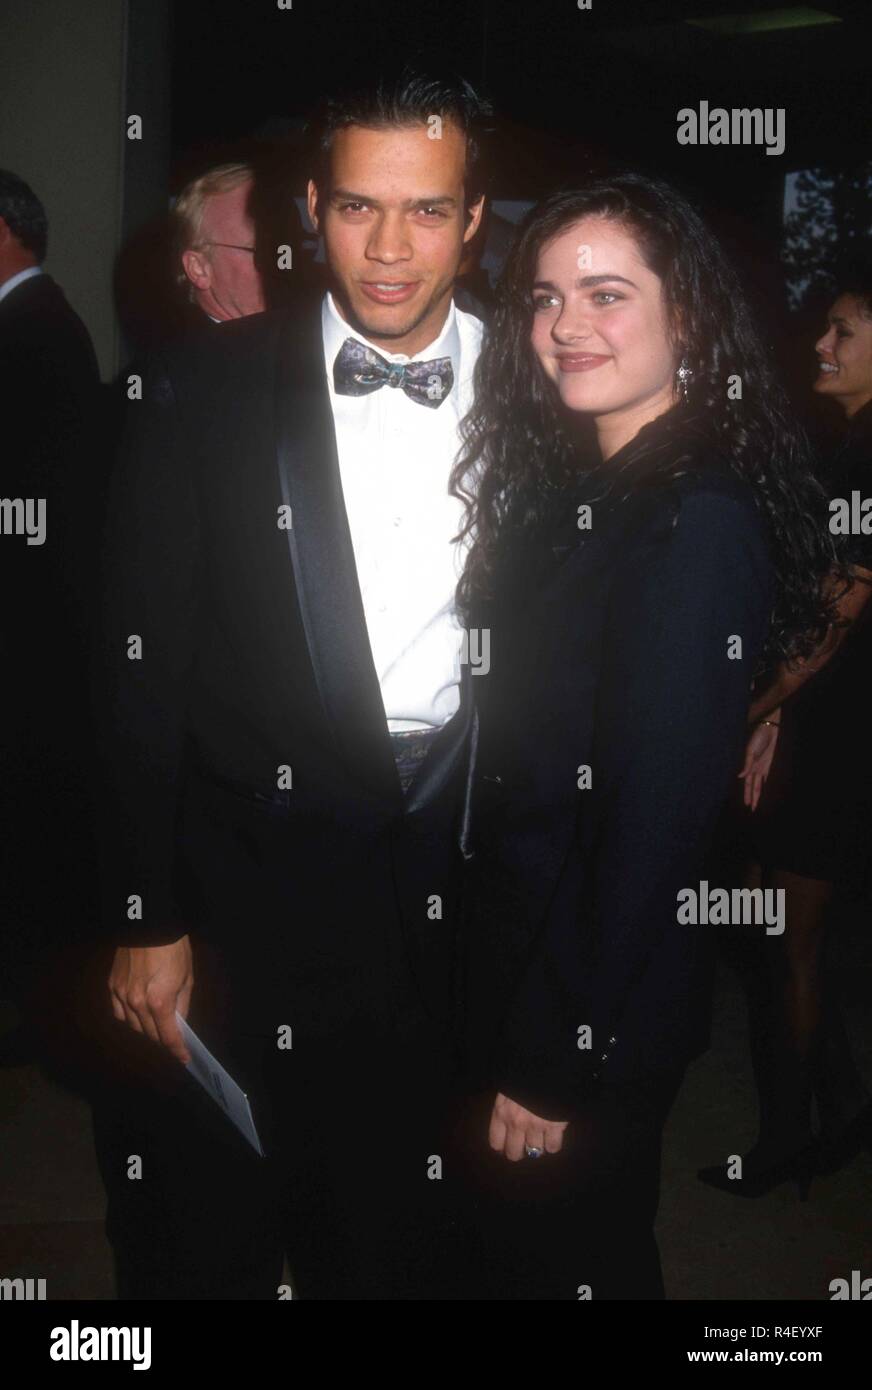 BEVERLY HILLS, CA - FEBRUARY 26: Actor Robert Fontaine attends the Ninth Annual Soap Opera Digest Awards on February 26, 1993 at the Beverly Hilton Hotel in Beverly Hills, California. Photo by Barry King/Alamy Stock Photo Stock Photo